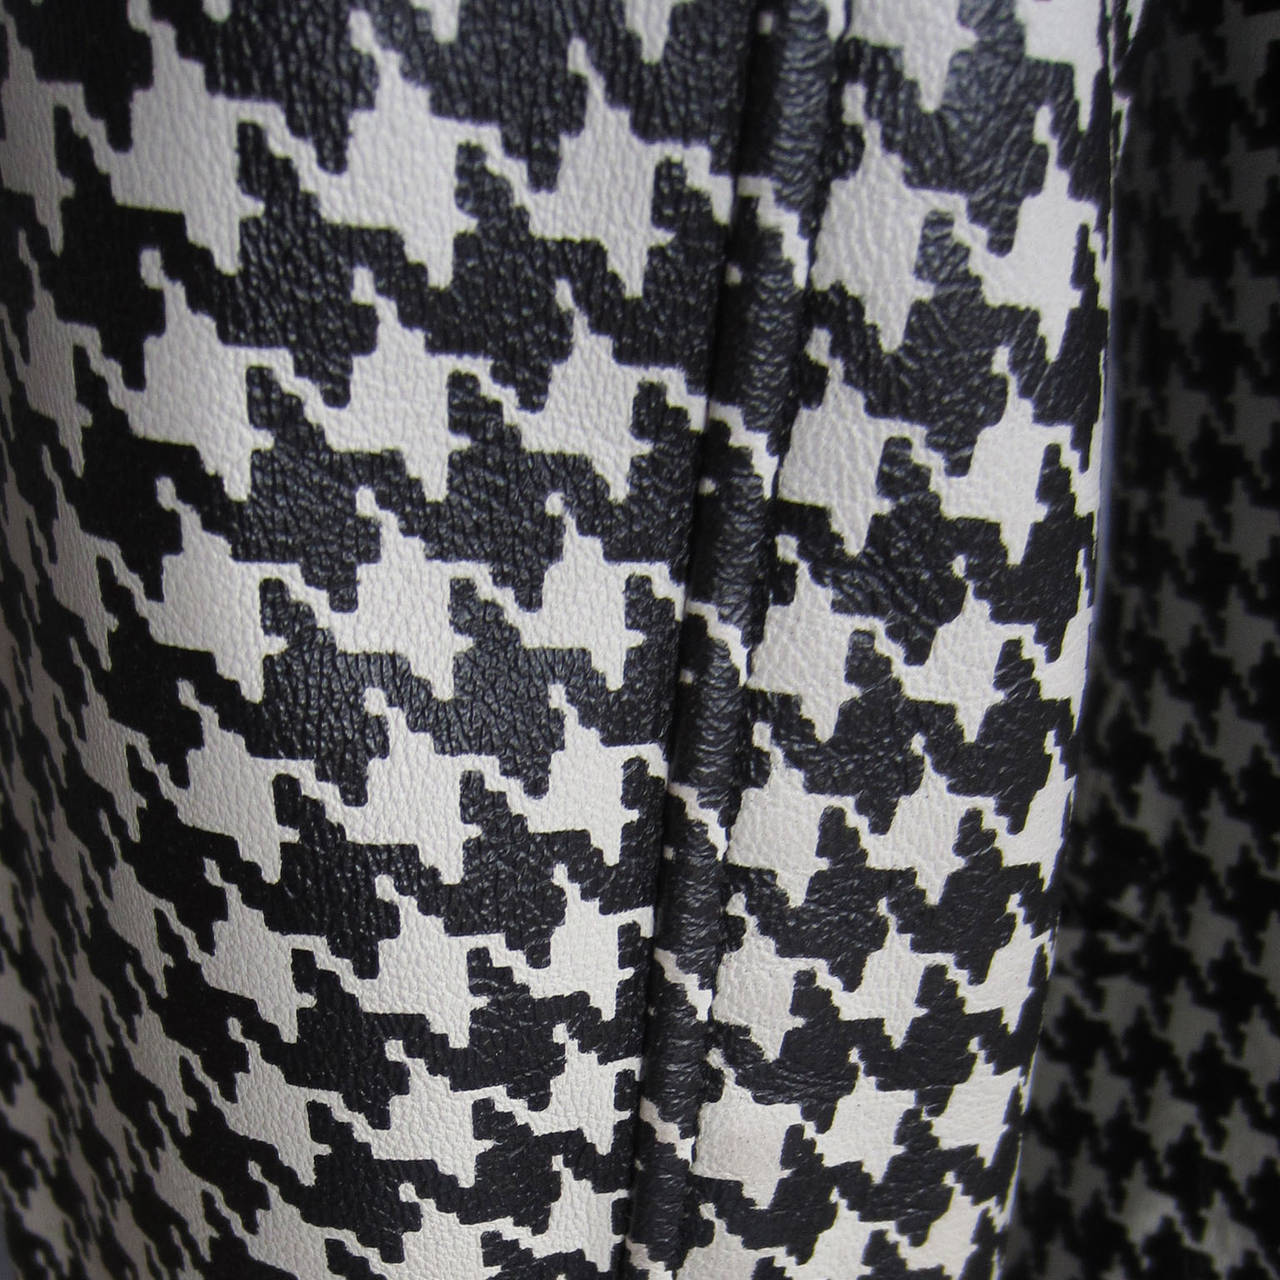 CHRISTIAN DIOR Houndstooth Leather Jacket 1